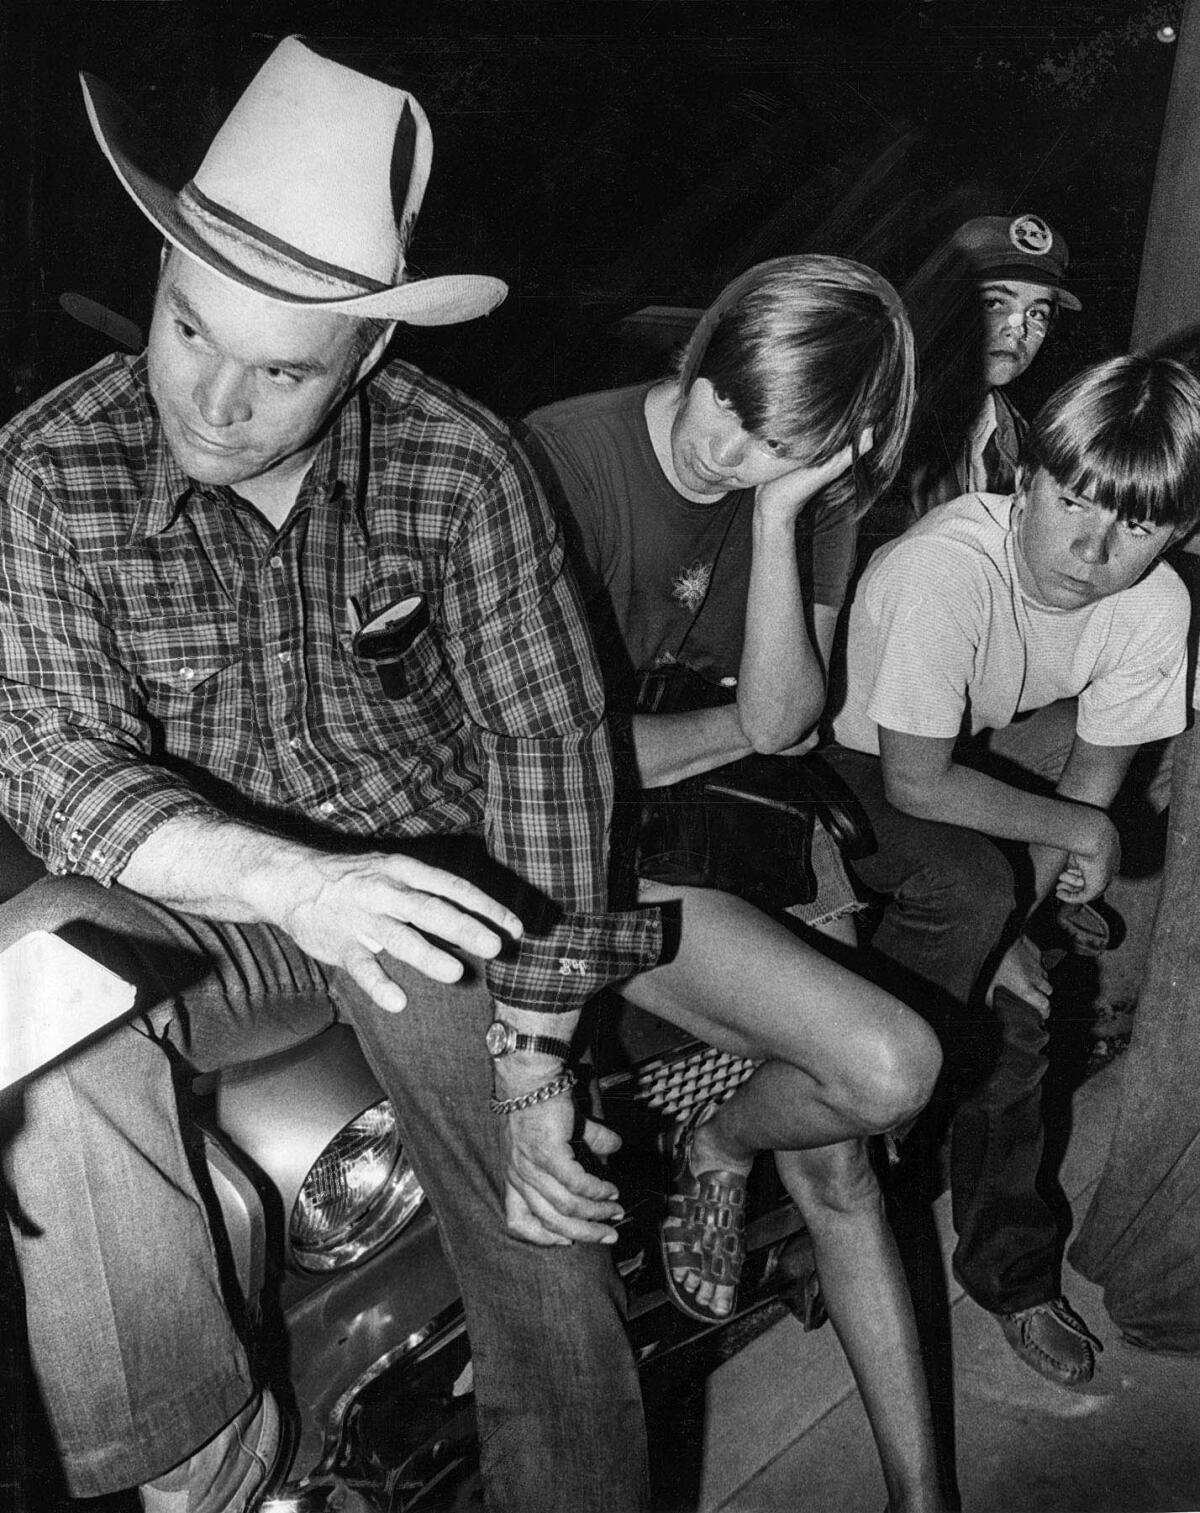 July 17, 1976: Bob, left, and Carol Marshall talk to a reporter while waiting at command post for return of their son Mike and other kidnap victims. Boys on right were not identified.